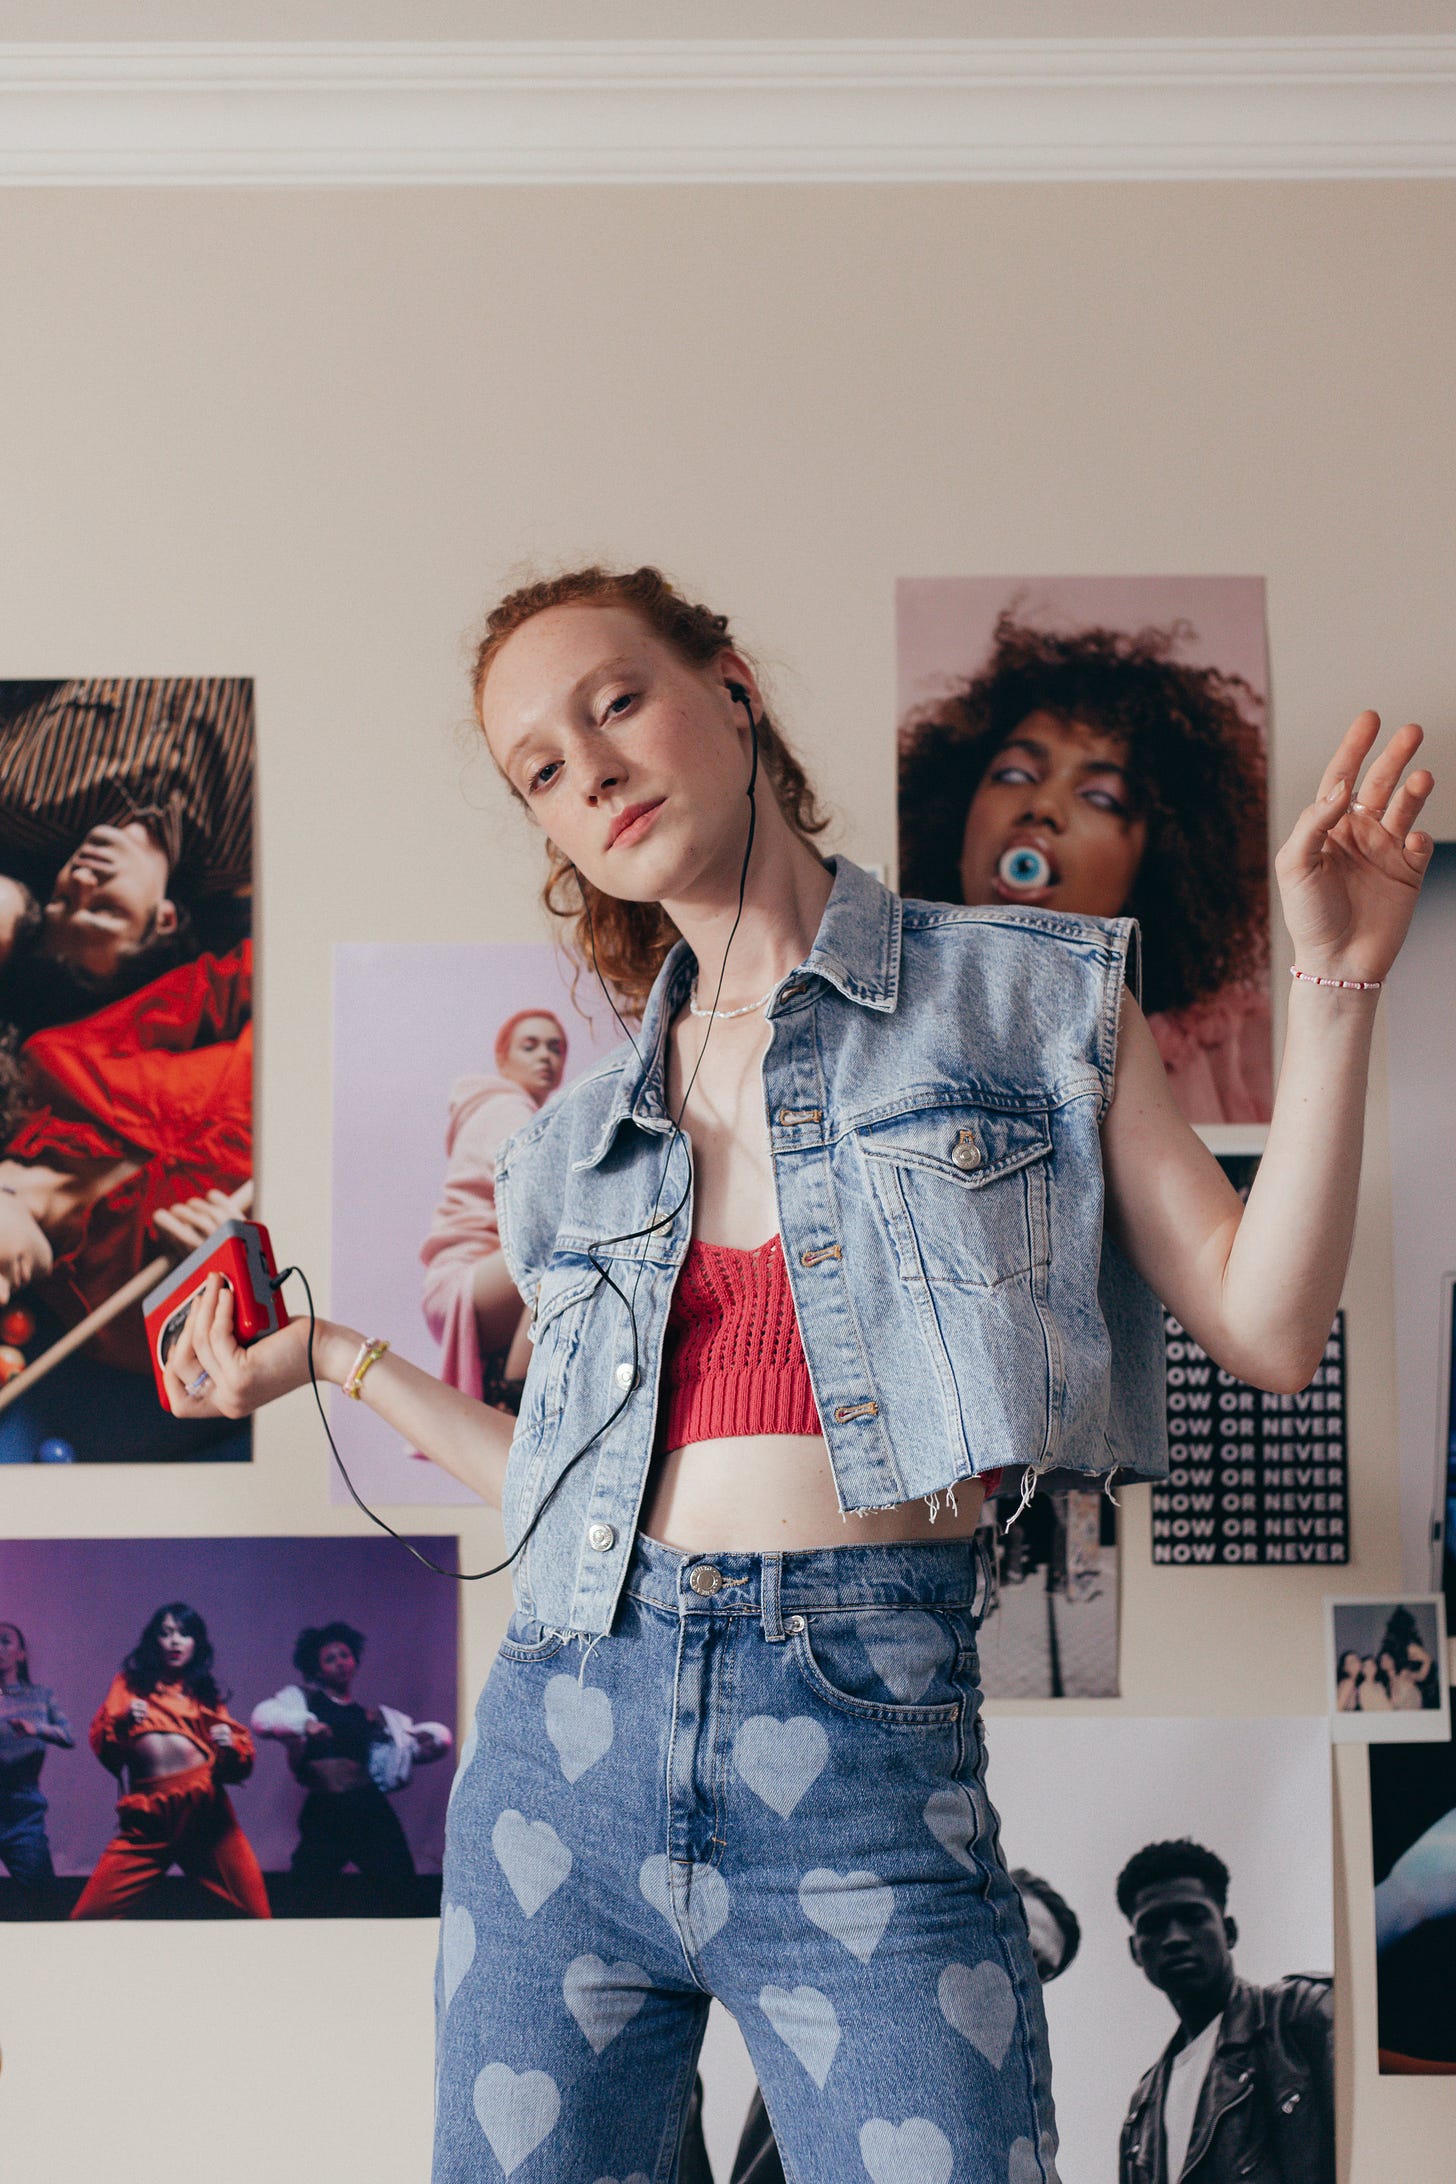 A young redheaded white woman in a jean vest and jeans with hearts on them listening to a walkman in front of a bunch of band posters.